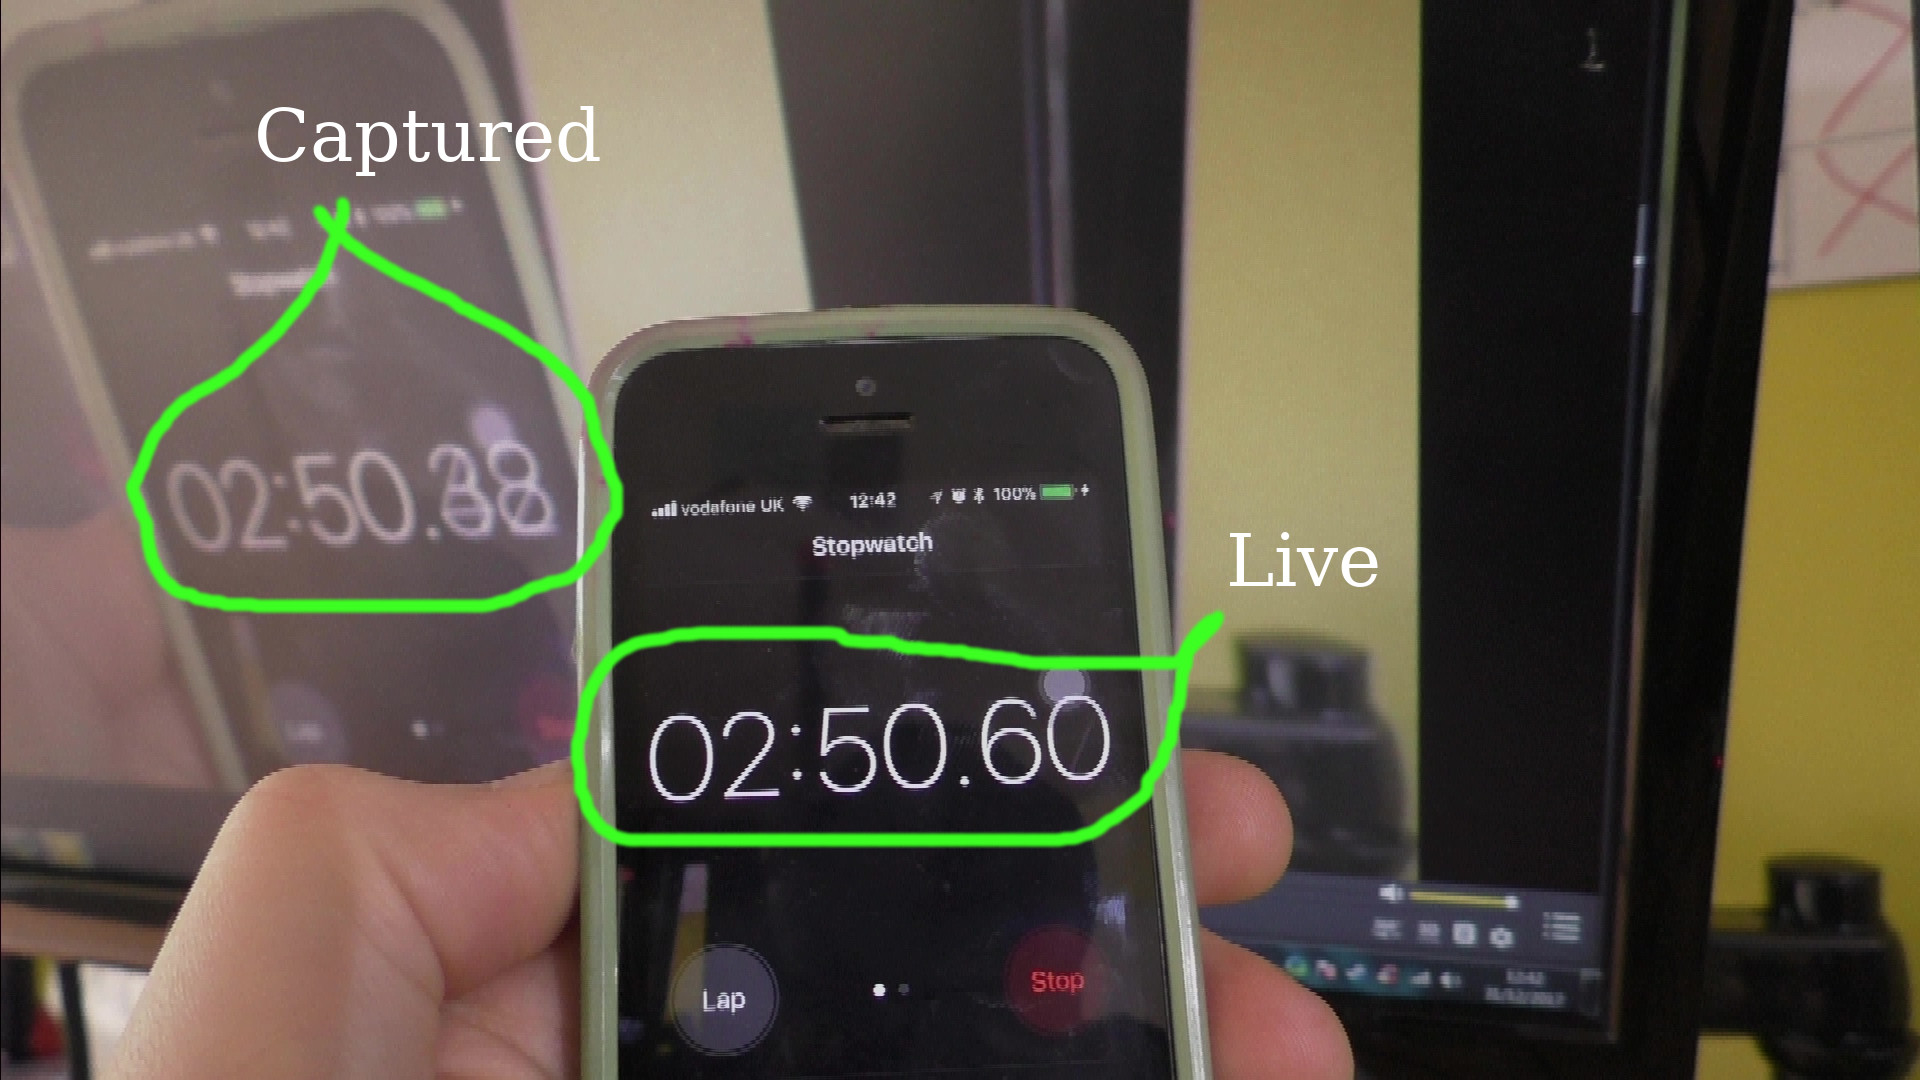 image of phone stop watch app and the captured feed. Showing Windows 7 latency is around 200ms